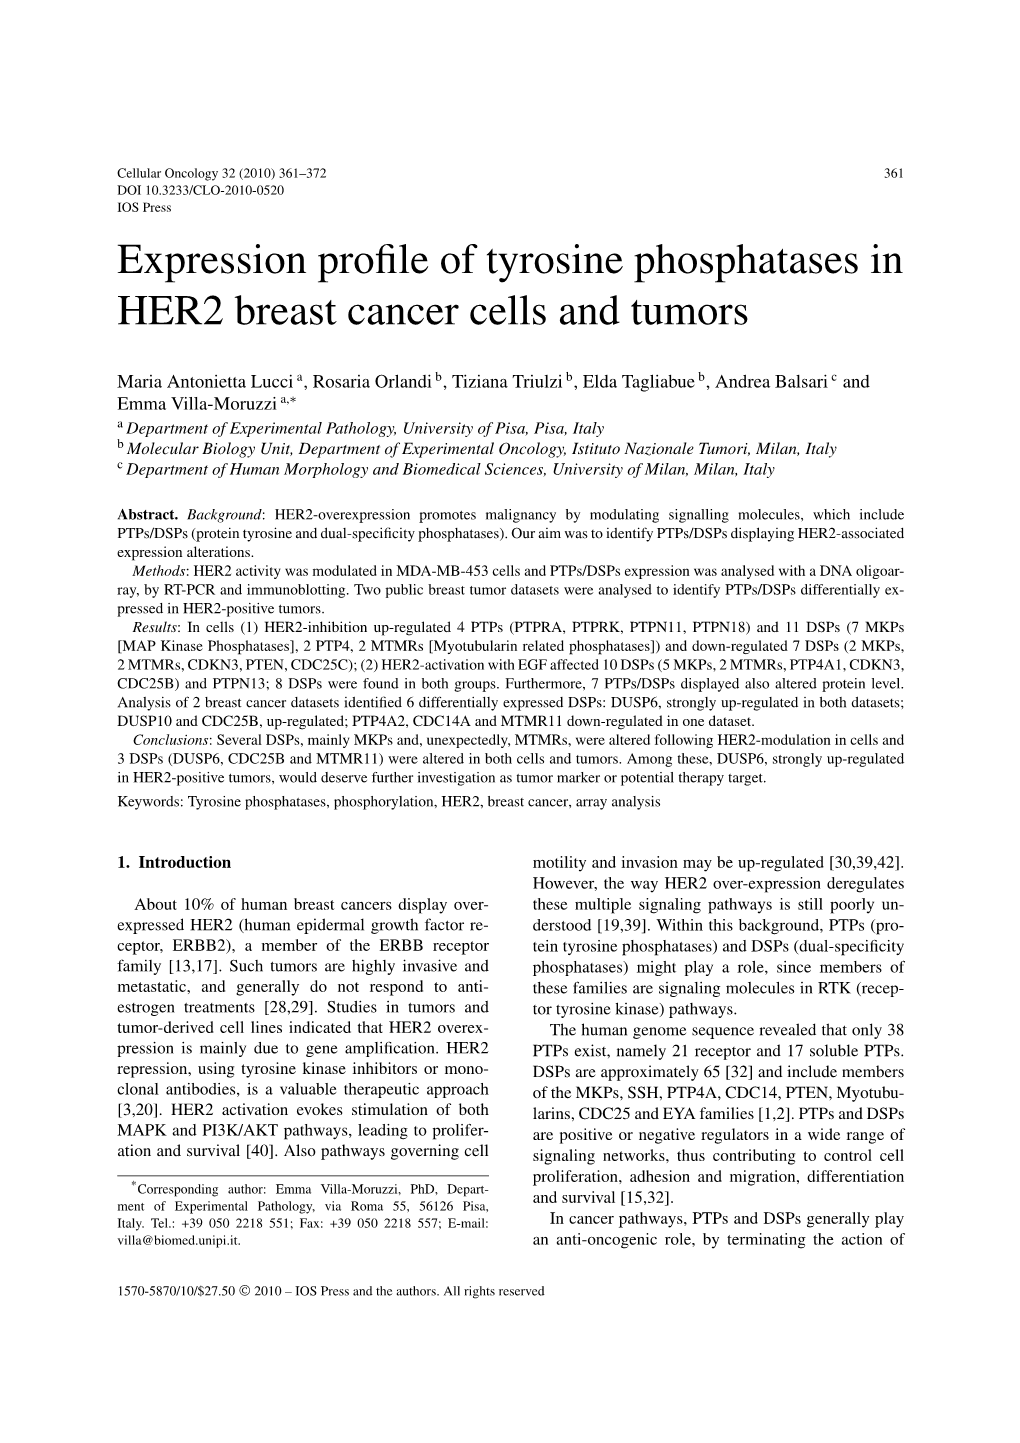 Expression Profile of Tyrosine Phosphatases in HER2 Breast